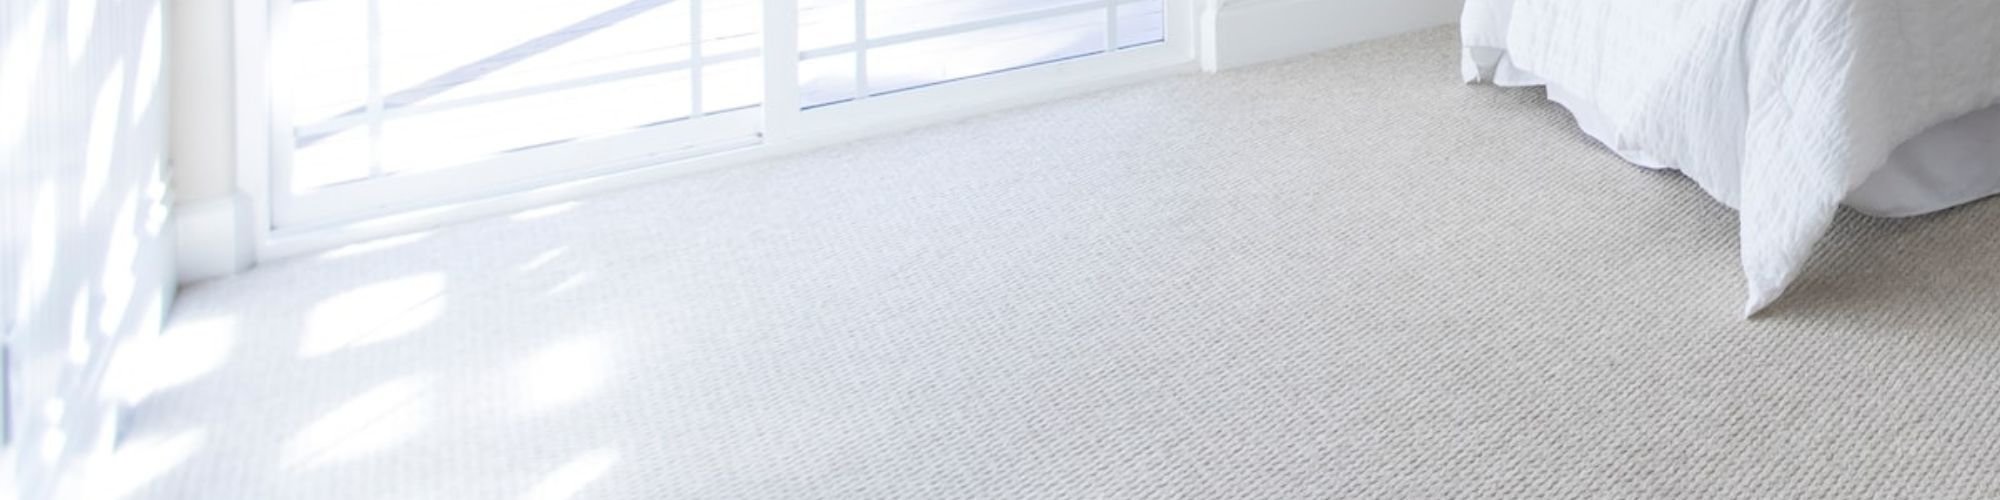 Learn more about the Commercial flooring services offered by CC Carpet in Arlington, TX.